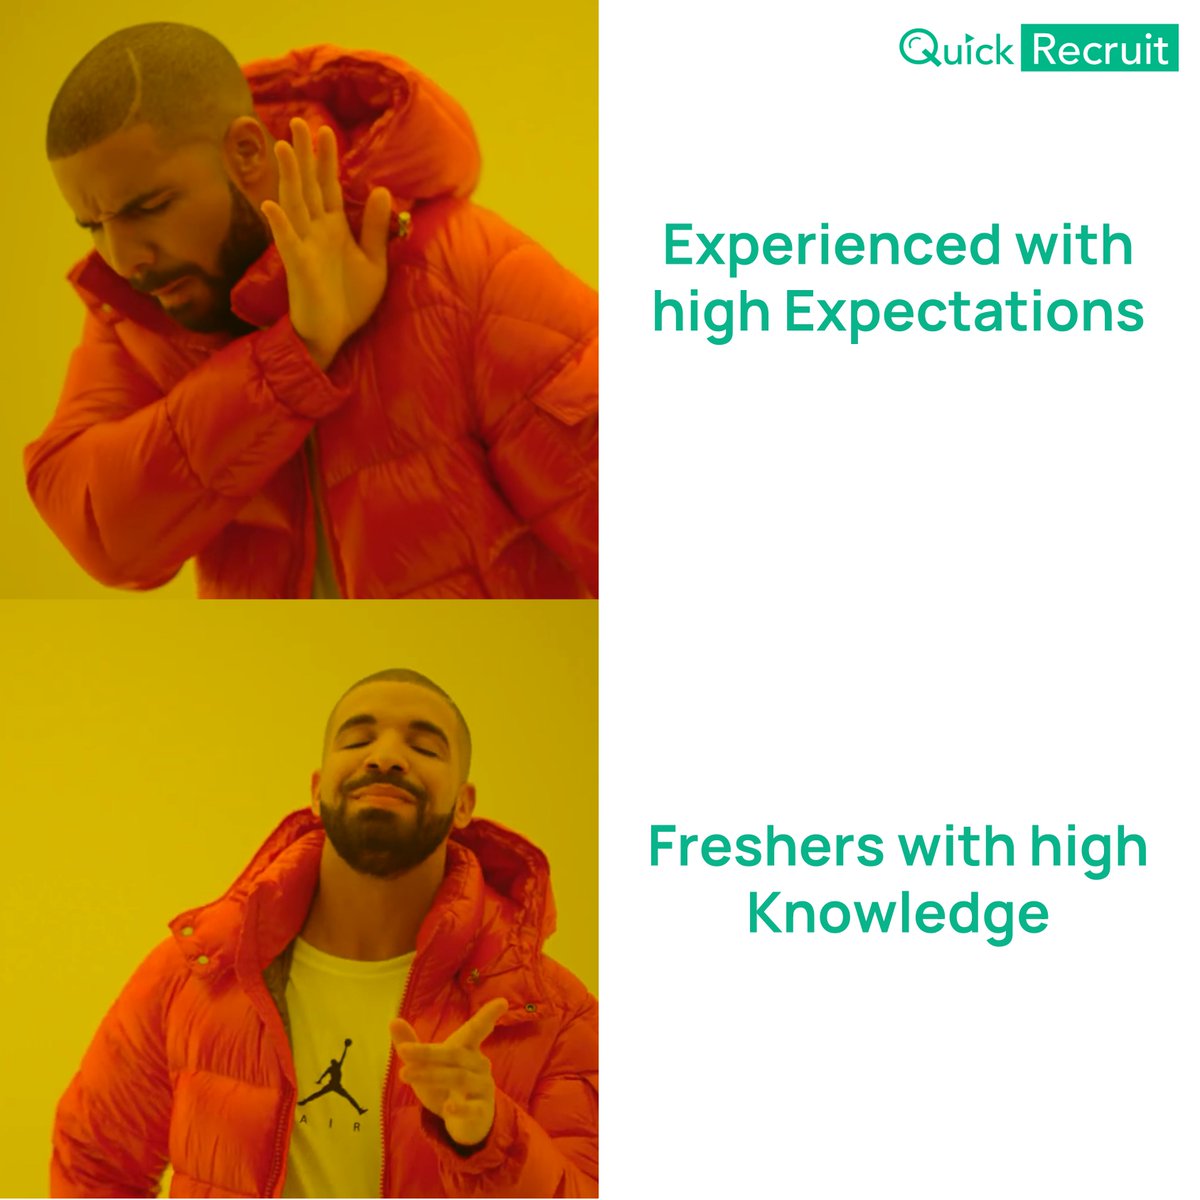 Here are the importance of fresher candidates with high knowledge: 
1)Fresh Perspectives 
2)Up-to-Date Knowledge 
3)Eagerness to Learn 

#meme #onlineinterview #viralmemes #newmeme #tech #virtualinterviews #interviewasaservice #quickrecruit #funnymemes #nichememes #memesdaily